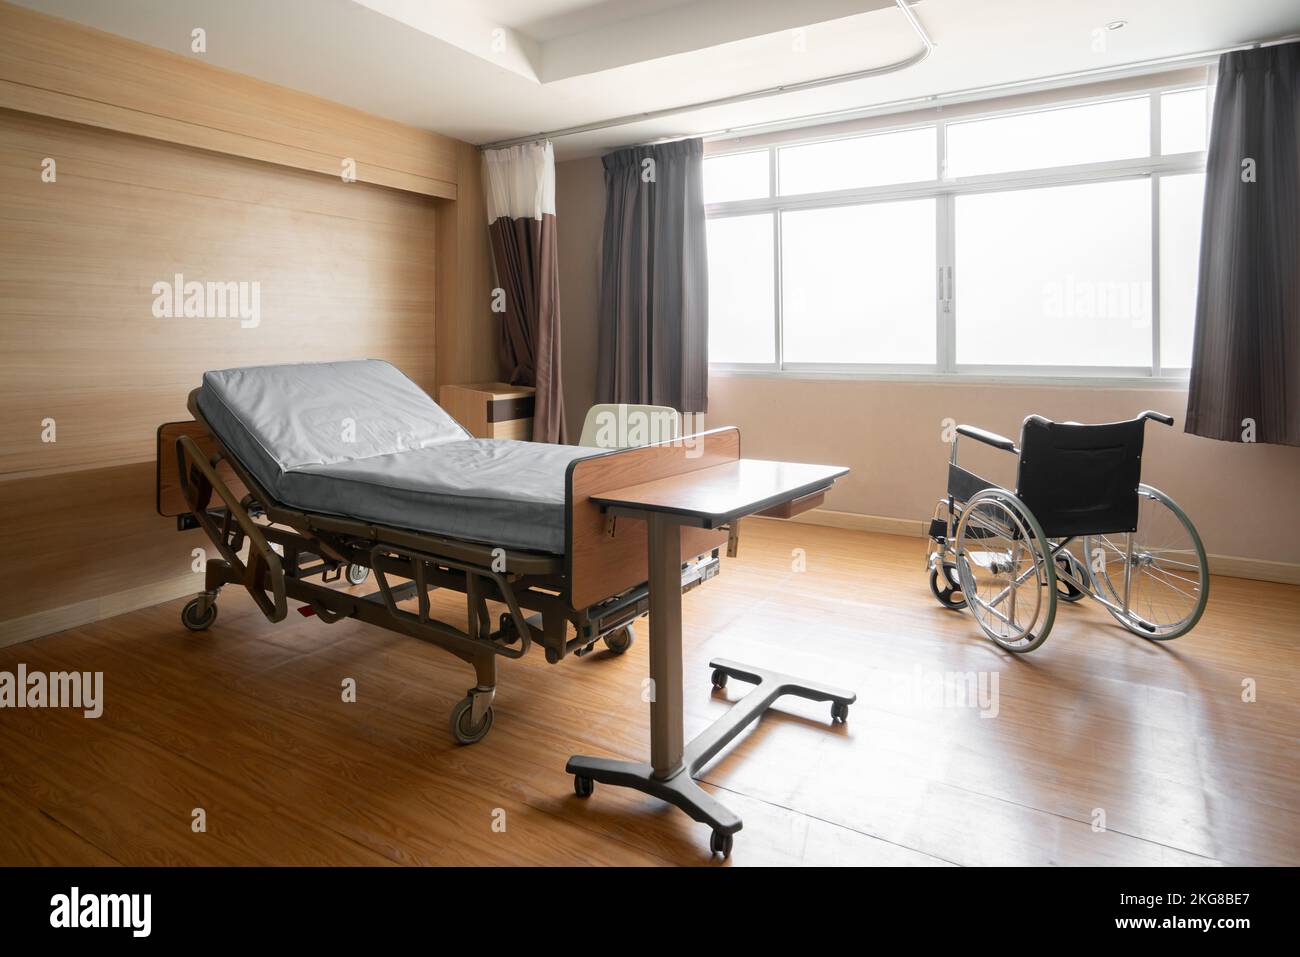 Sterile recovery room equipped with comfortable modern medical sickbed for patient recovery. Photo of a hospital bedroom or ward for patient treatment Stock Photo